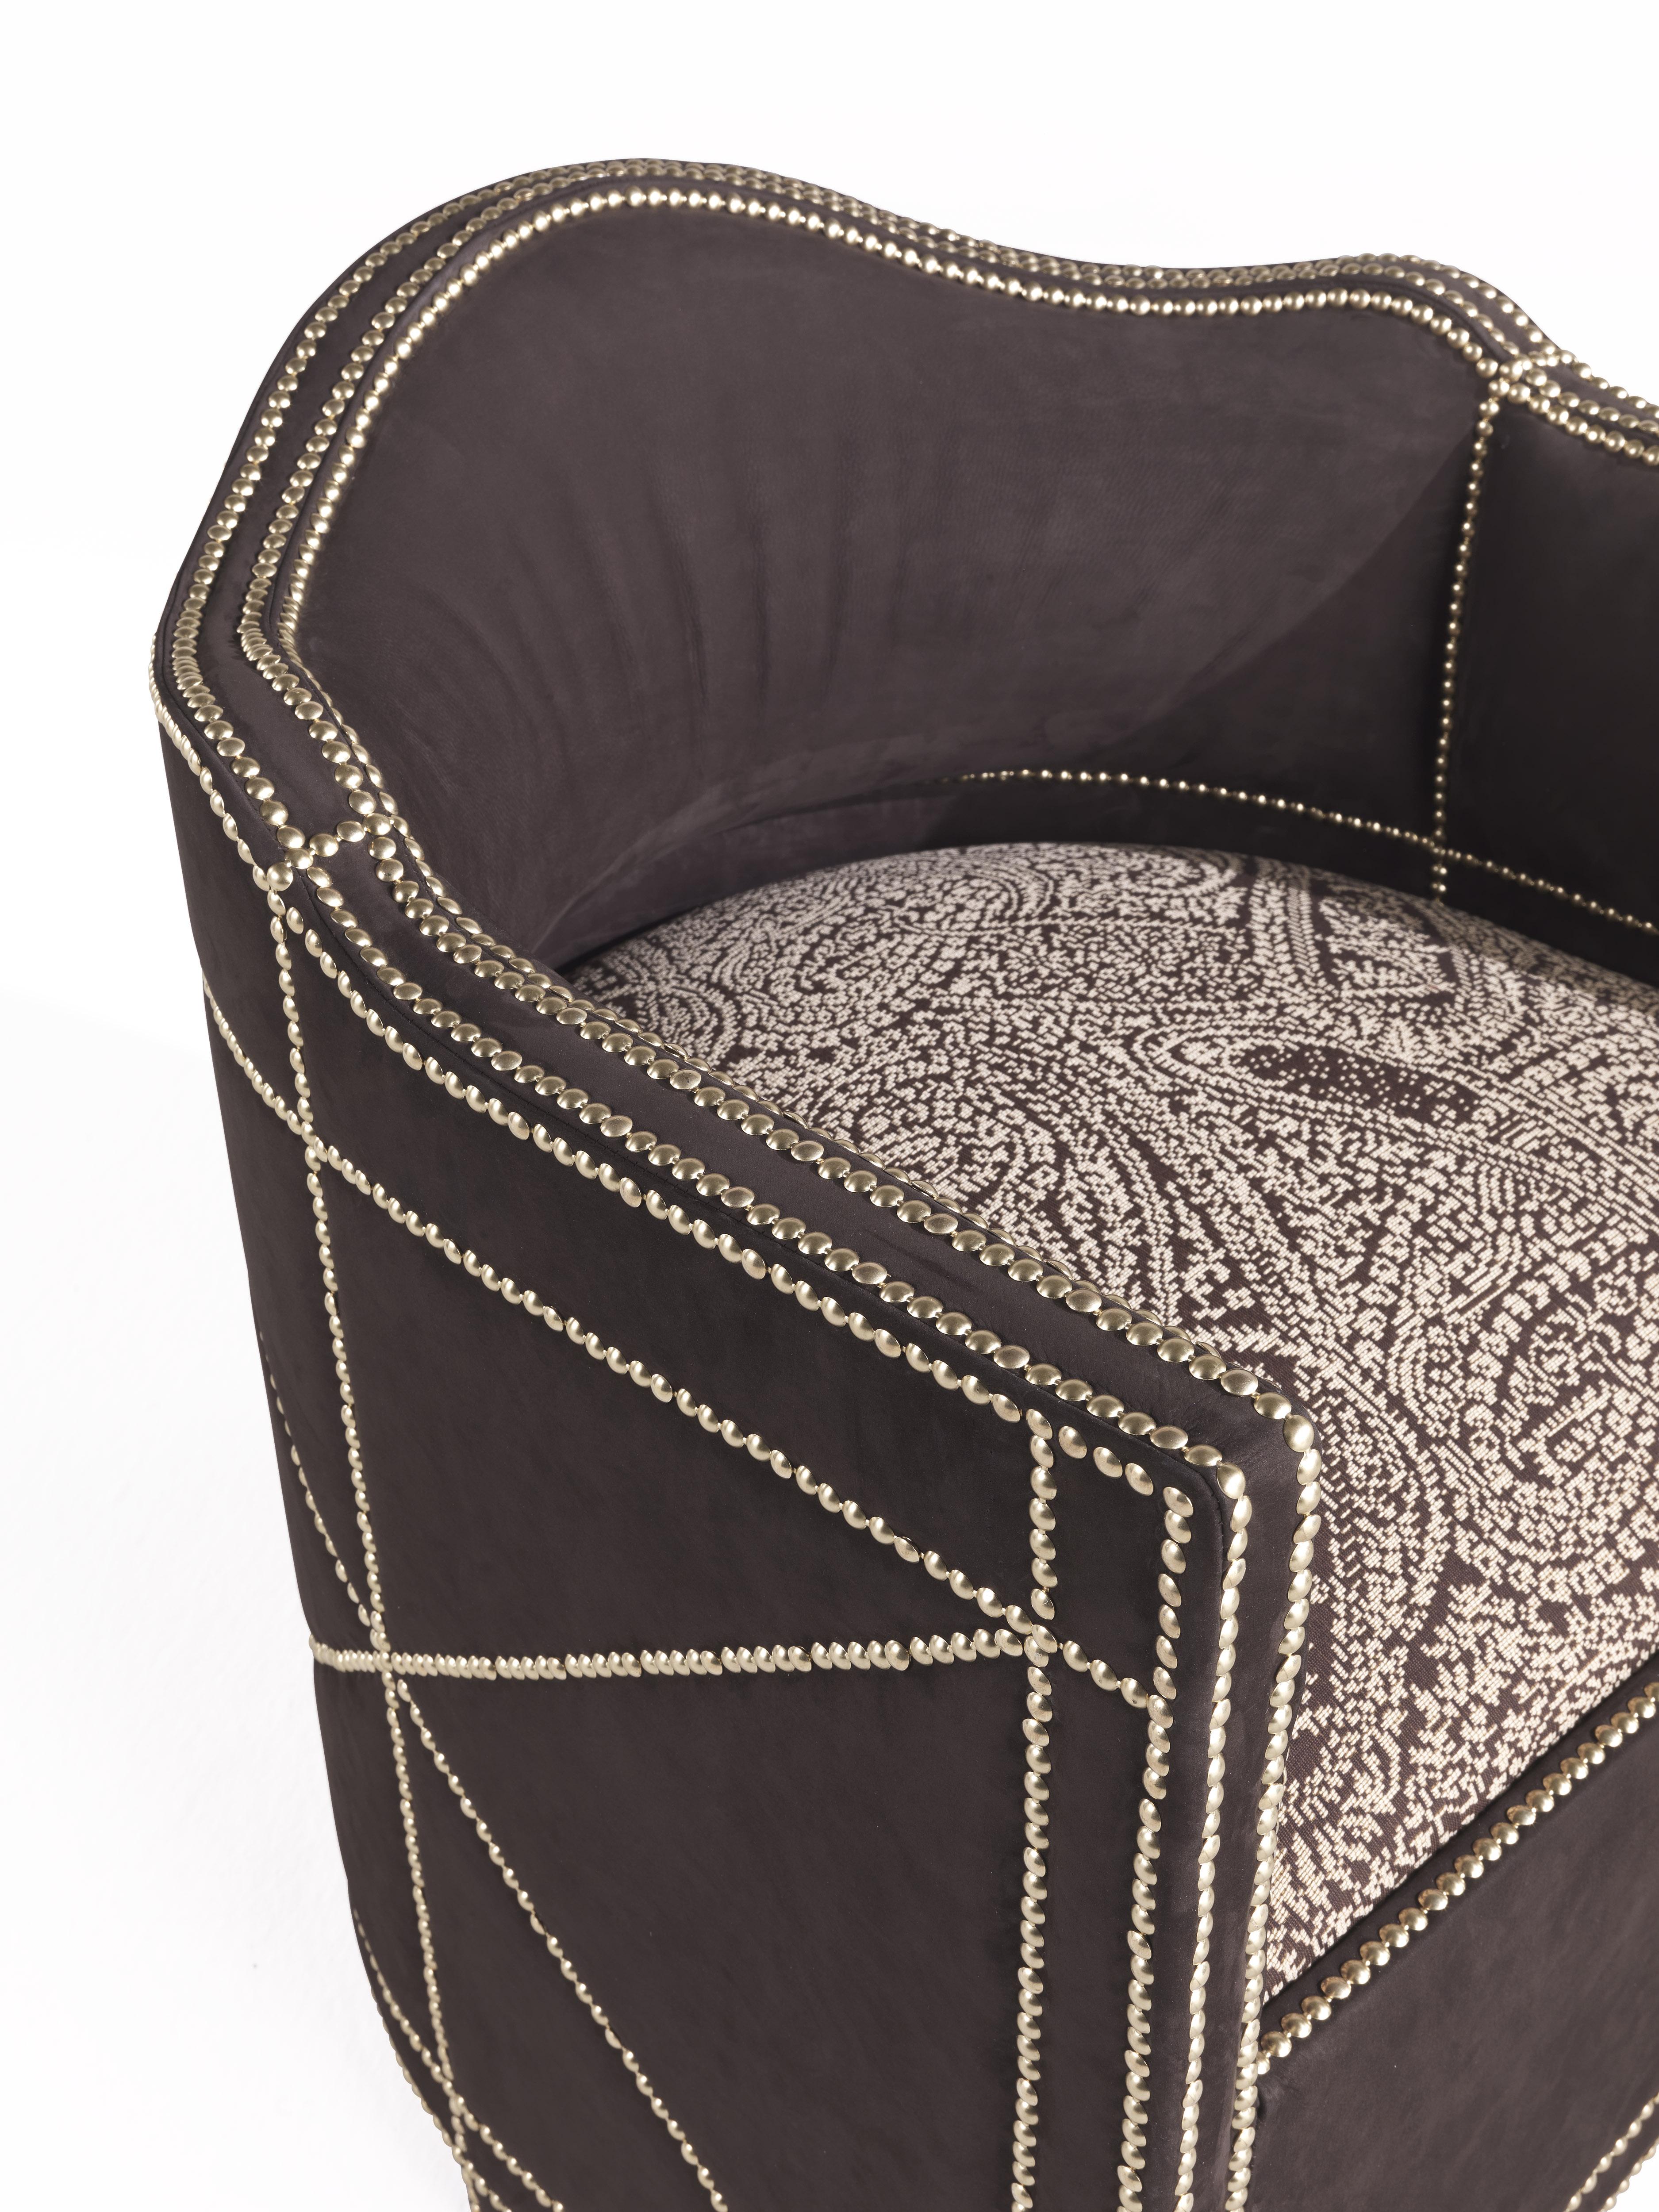 Modern 21st Century Nubia Armchair in Leather and Fabric by Etro Home Interiors